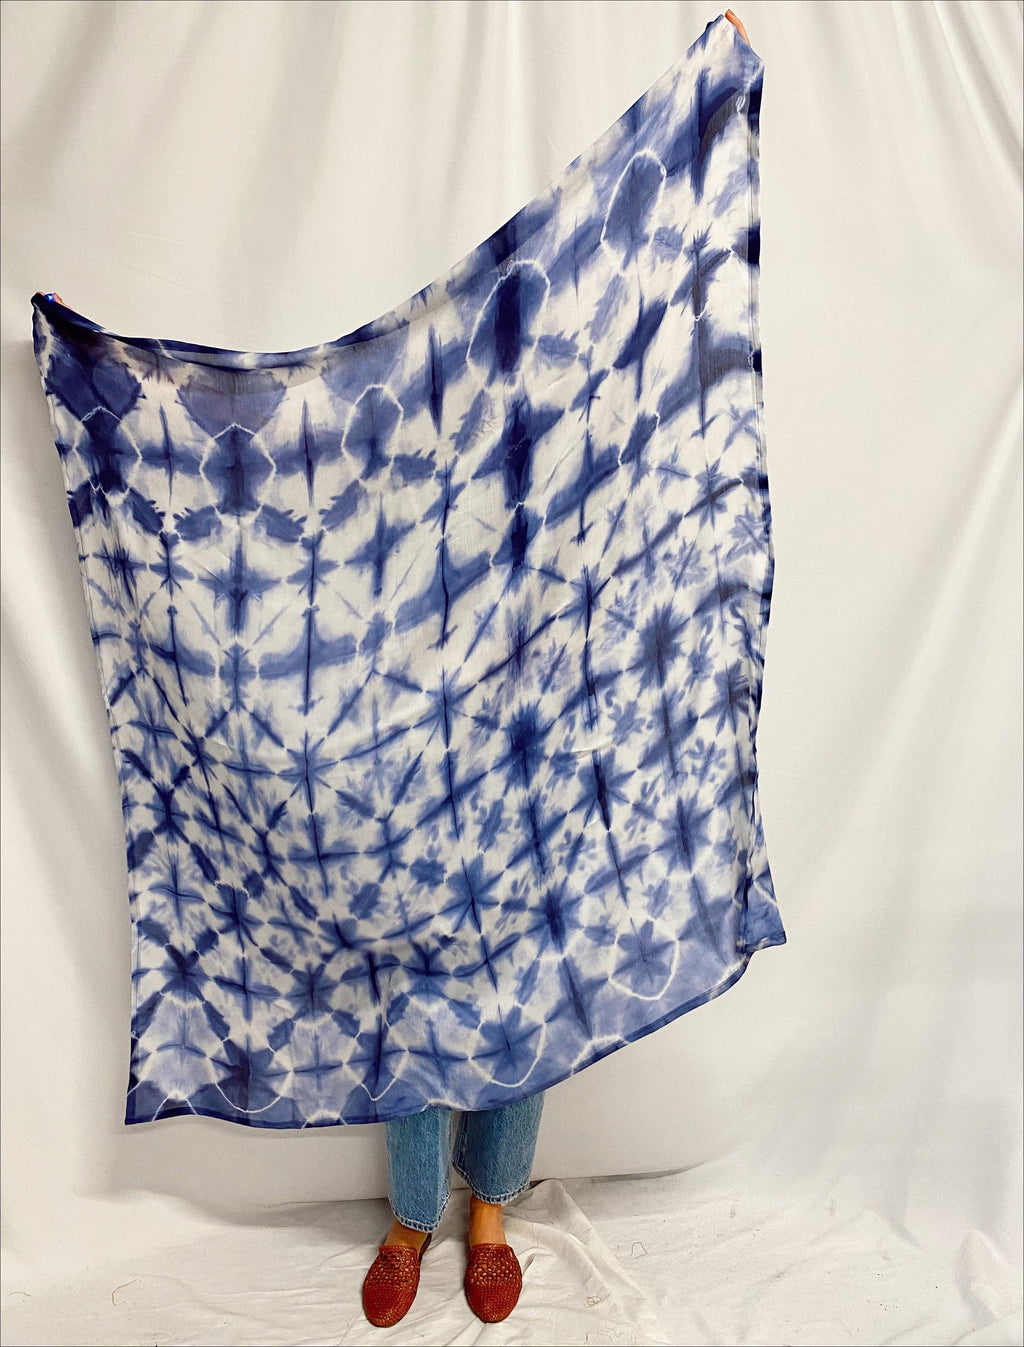 Explore Designs By Emelia Prince Ruyle - Midnight Silk Wool Blanket Scarf Hand Dyed